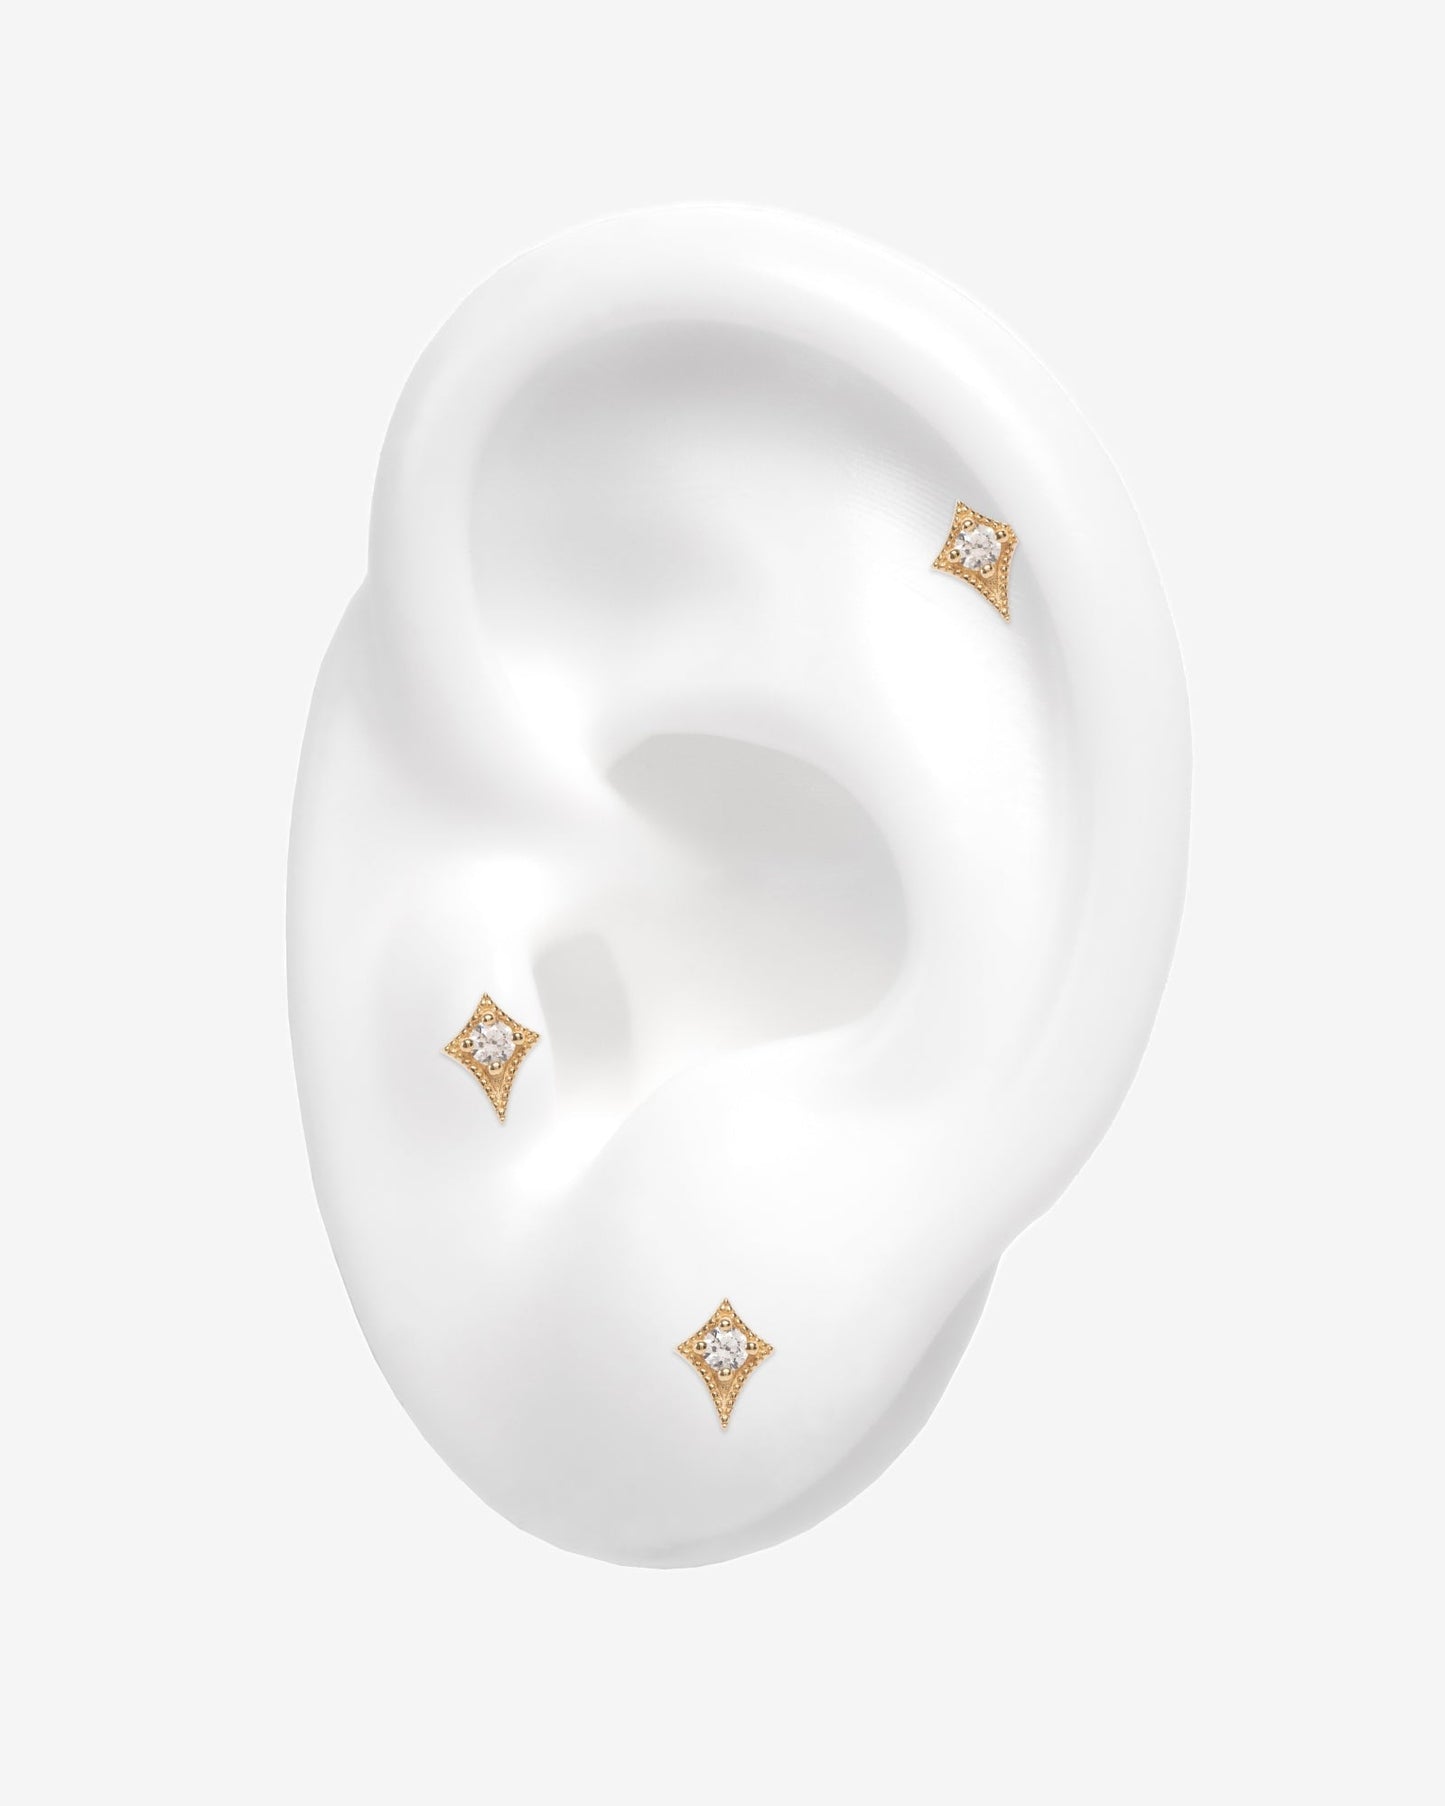 Gail Threadless End (14K Gold) - Ends - Ask and Embla